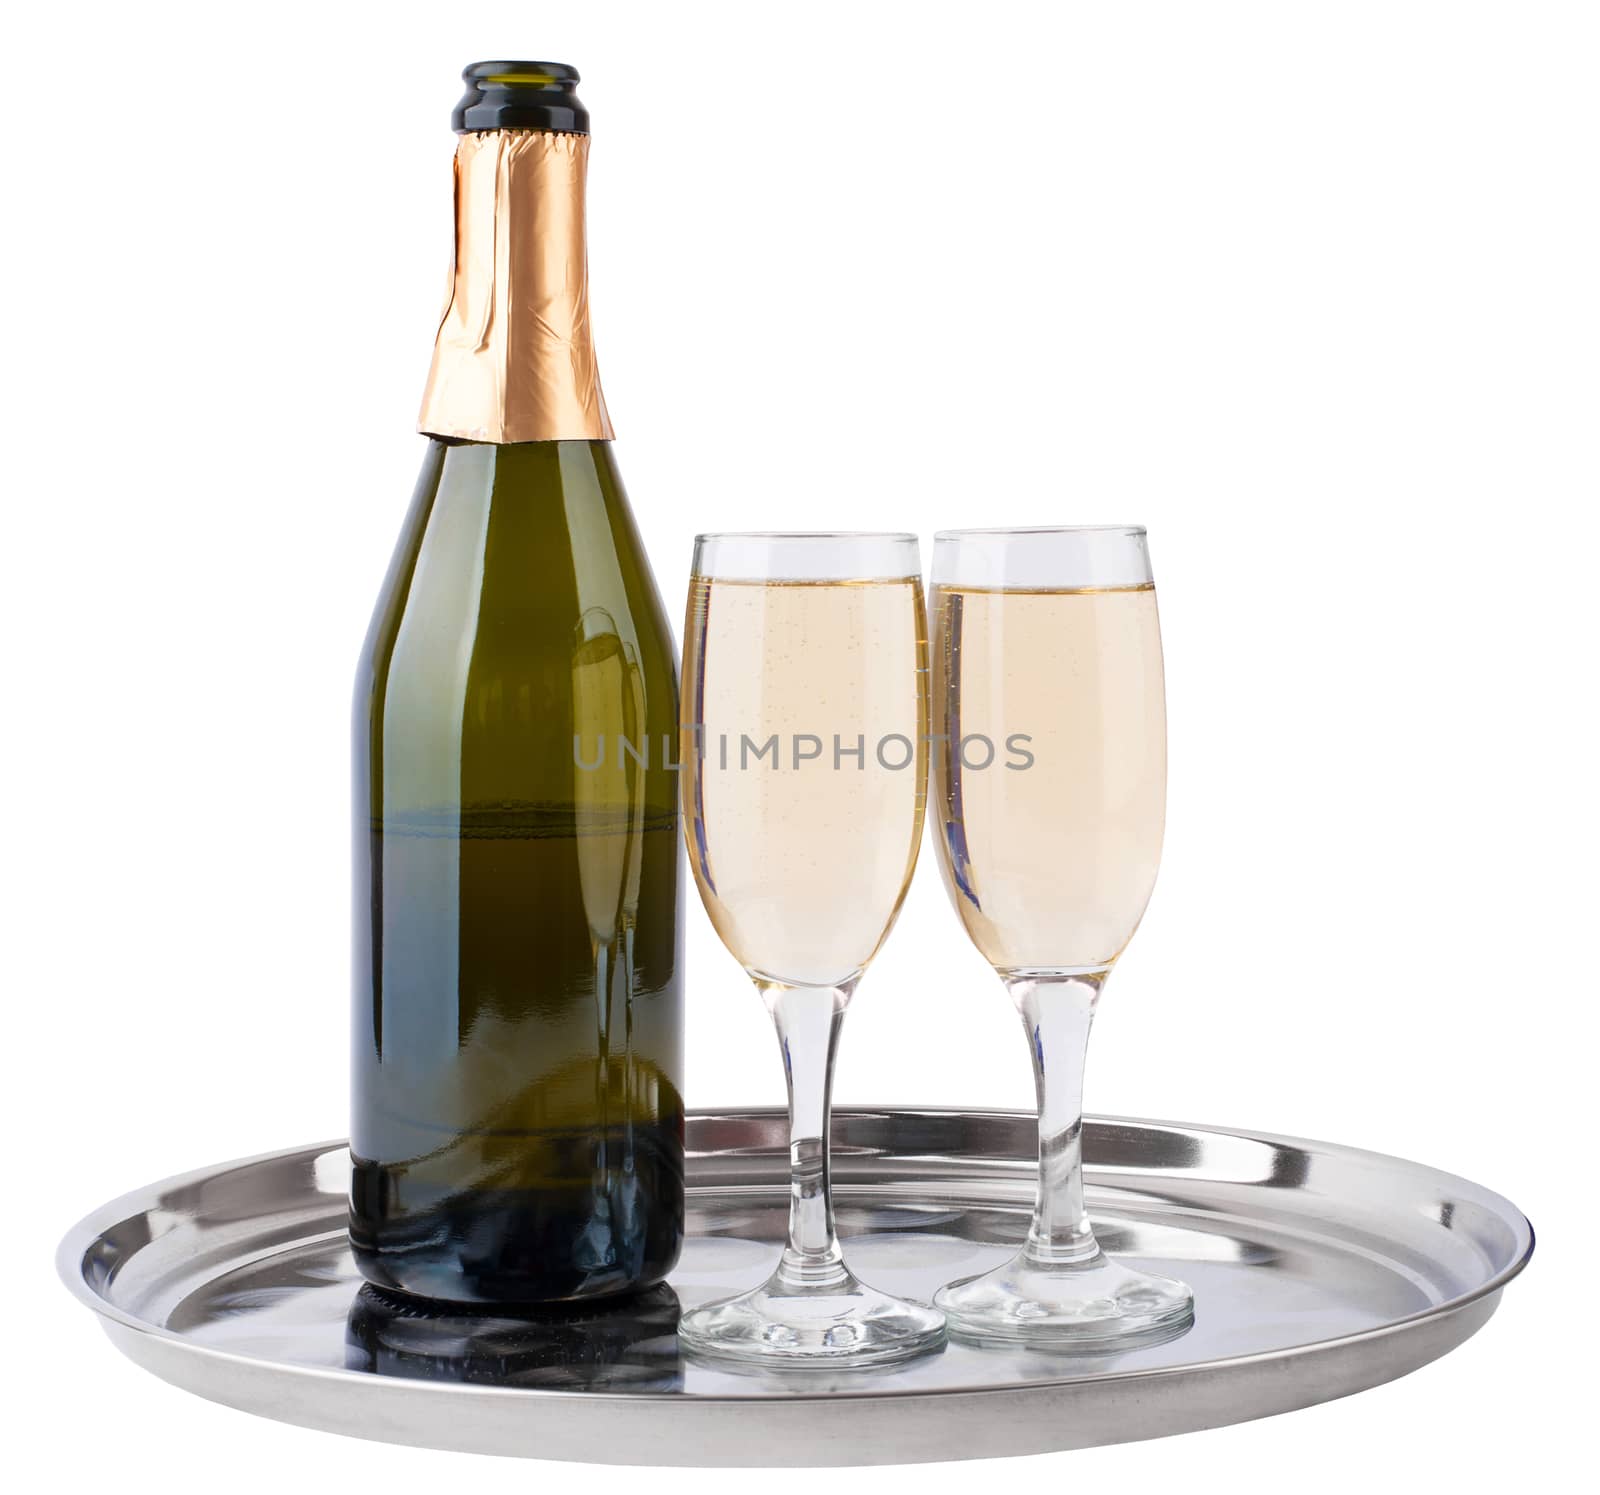 Champagne bottle and glasses by cherezoff